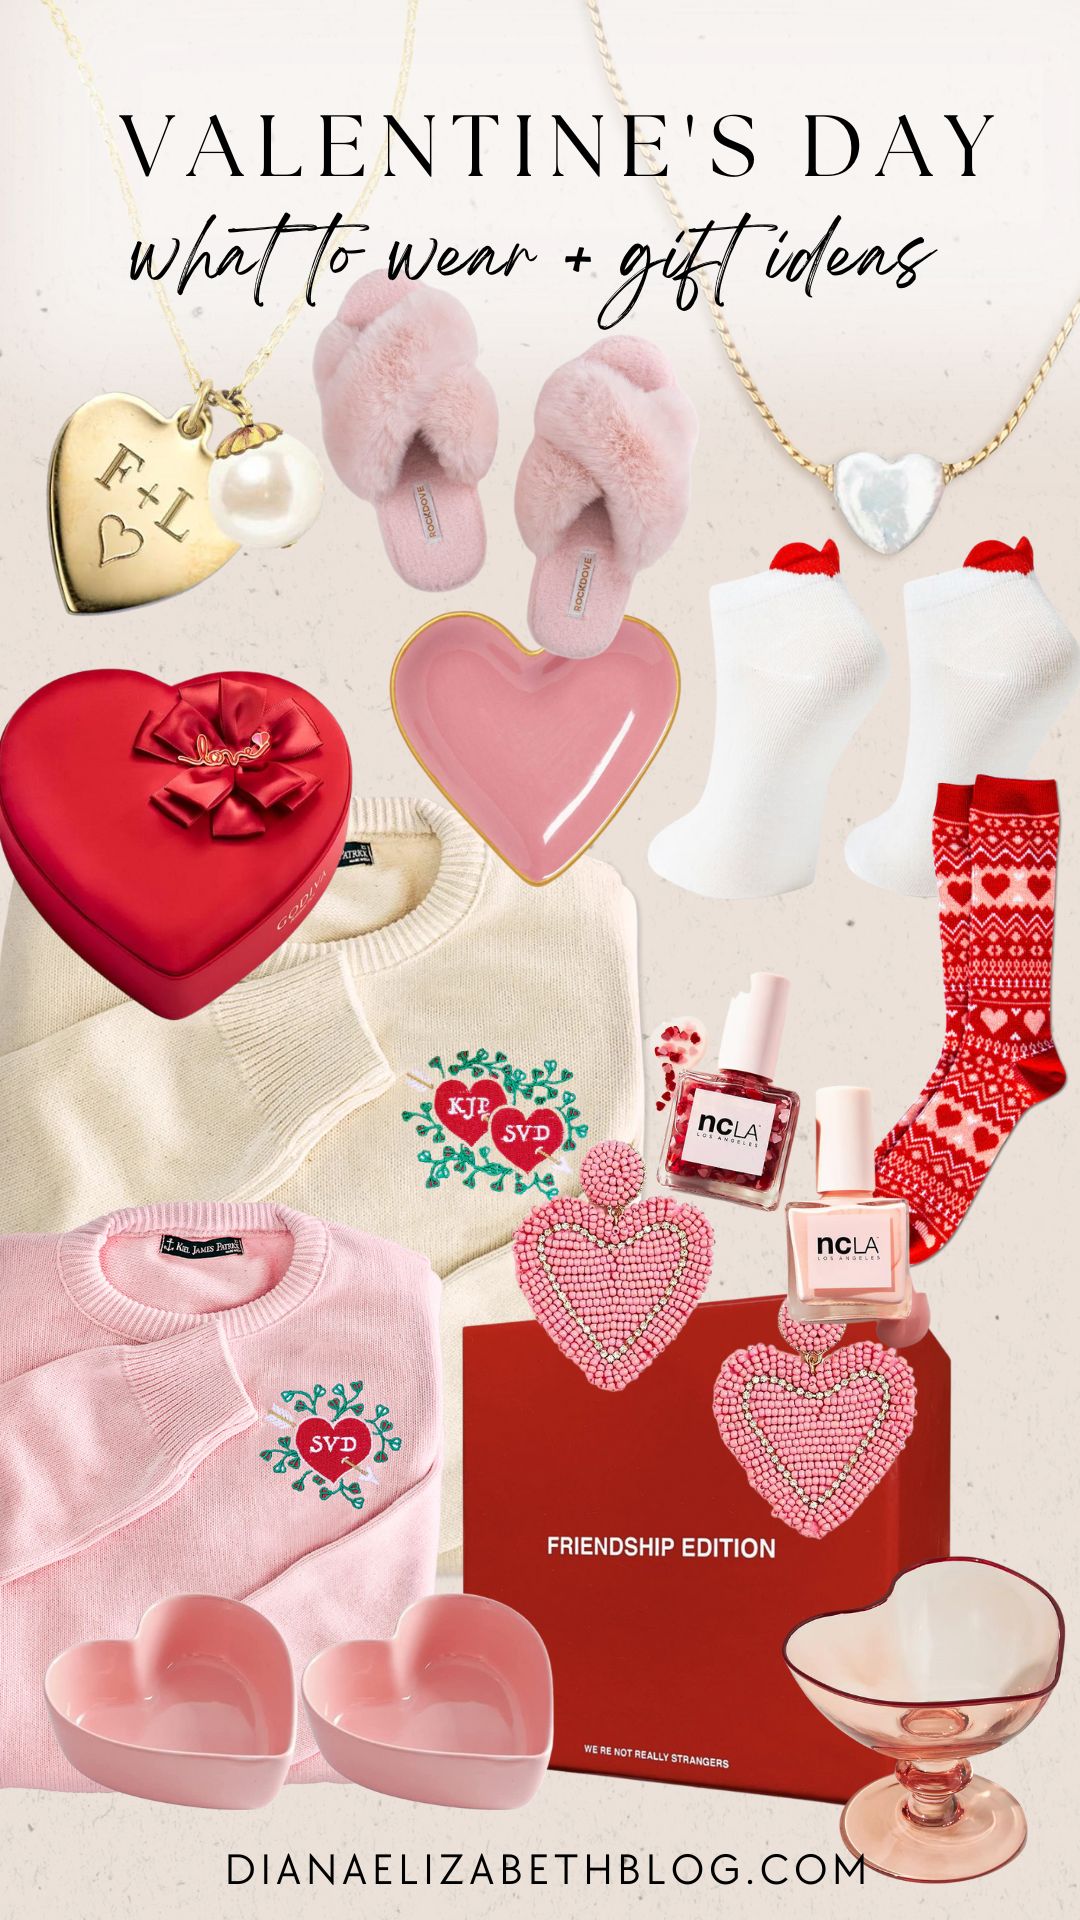 Valentine's Day attire and gift ideas for galentine's day